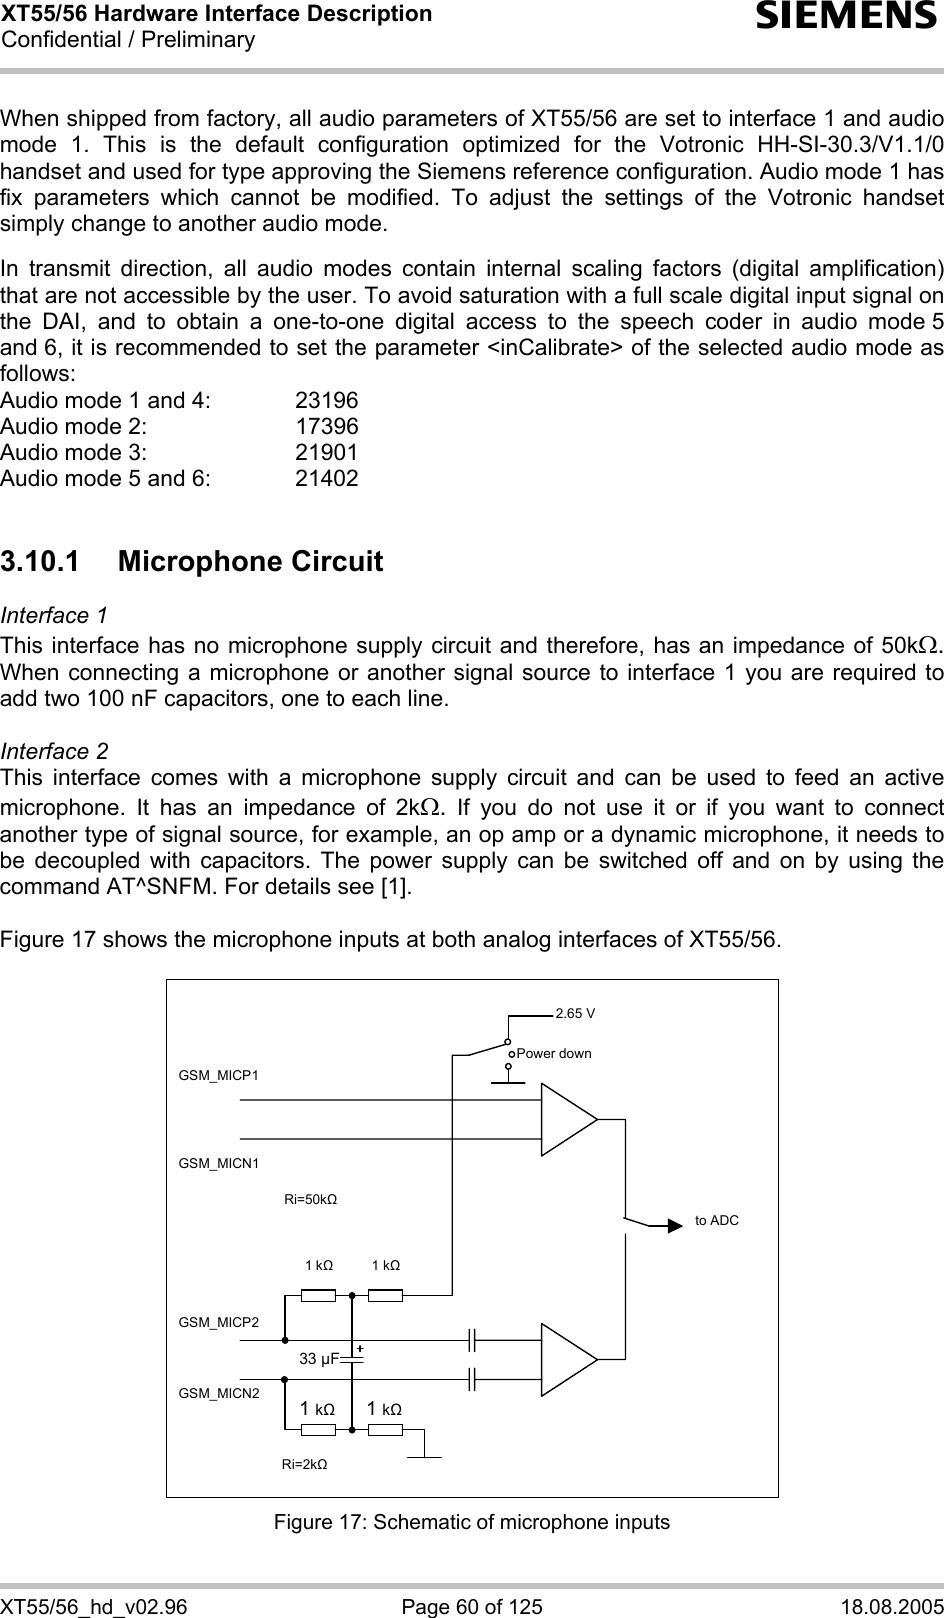 XT55/56 Hardware Interface Description Confidential / Preliminary s XT55/56_hd_v02.96  Page 60 of 125  18.08.2005  When shipped from factory, all audio parameters of XT55/56 are set to interface 1 and audio mode 1. This is the default configuration optimized for the Votronic HH-SI-30.3/V1.1/0 handset and used for type approving the Siemens reference configuration. Audio mode 1 has fix parameters which cannot be modified. To adjust the settings of the Votronic handset simply change to another audio mode.  In transmit direction, all audio modes contain internal scaling factors (digital amplification) that are not accessible by the user. To avoid saturation with a full scale digital input signal on the DAI, and to obtain a one-to-one digital access to the speech coder in audio mode 5 and 6, it is recommended to set the parameter &lt;inCalibrate&gt; of the selected audio mode as follows: Audio mode 1 and 4:    23196 Audio mode 2:     17396 Audio mode 3:    21901 Audio mode 5 and 6:    21402  3.10.1 Microphone Circuit Interface 1  This interface has no microphone supply circuit and therefore, has an impedance of 50kΩ. When connecting a microphone or another signal source to interface 1 you are required to add two 100 nF capacitors, one to each line.   Interface 2 This interface comes with a microphone supply circuit and can be used to feed an active microphone. It has an impedance of 2kΩ. If you do not use it or if you want to connect another type of signal source, for example, an op amp or a dynamic microphone, it needs to be decoupled with capacitors. The power supply can be switched off and on by using the command AT^SNFM. For details see [1].  Figure 17 shows the microphone inputs at both analog interfaces of XT55/56.    2.65 V to ADC Power down GSM_MICP1 GSM_MICN1 GSM_MICP2 GSM_MICN2 1 k   1 k 1 k 1 k33 µF Ri=50k Ri=2k  Figure 17: Schematic of microphone inputs 